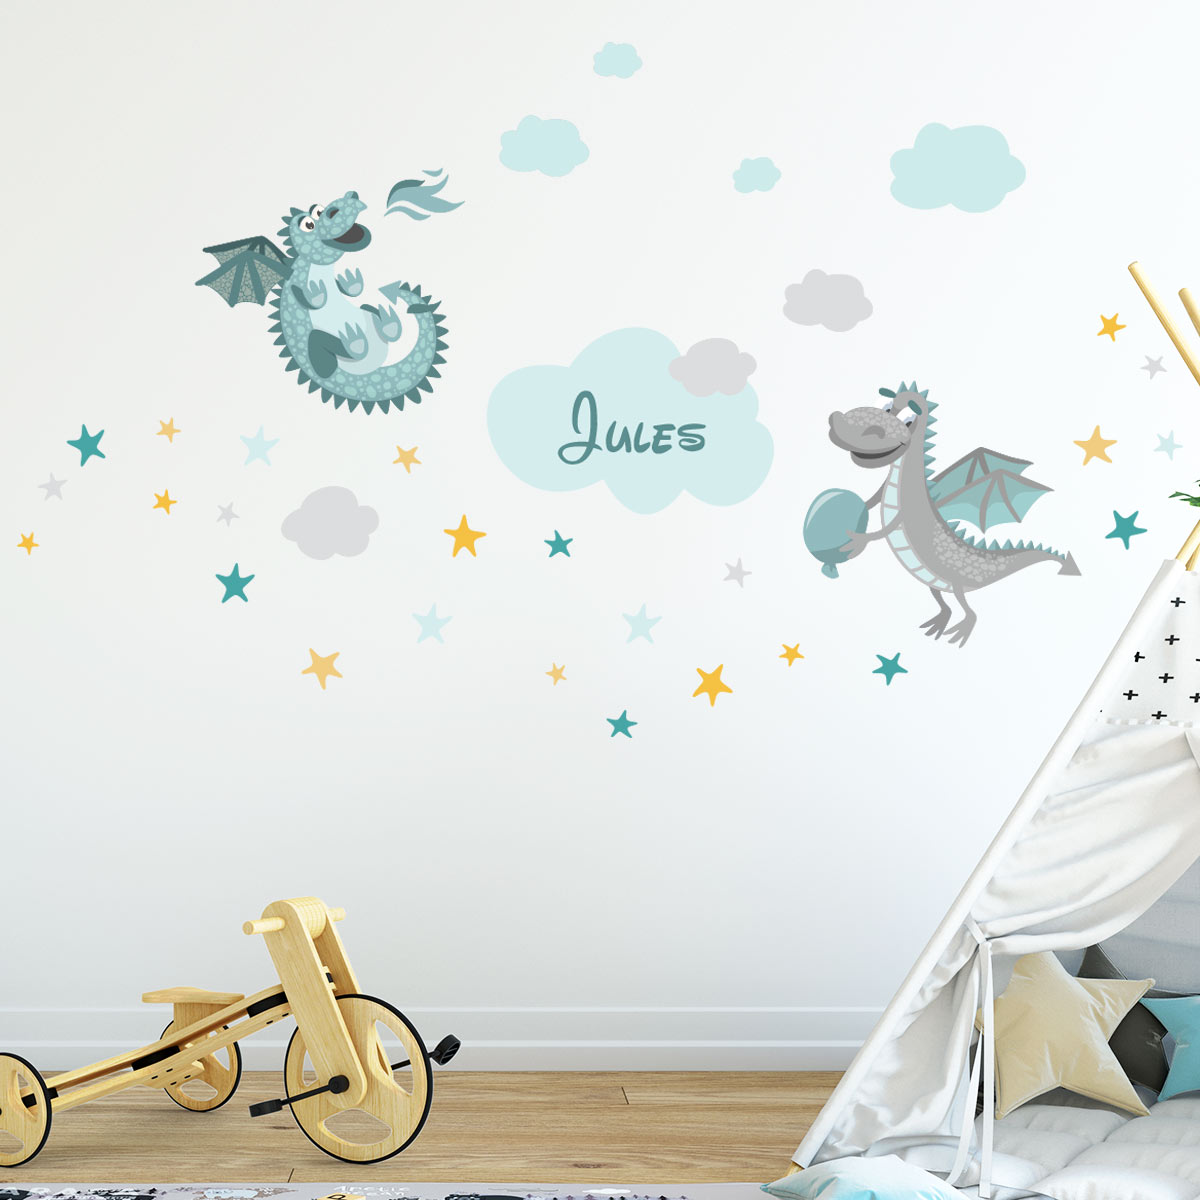 Wall sticker turquoise and gray dinosaurs customizable names